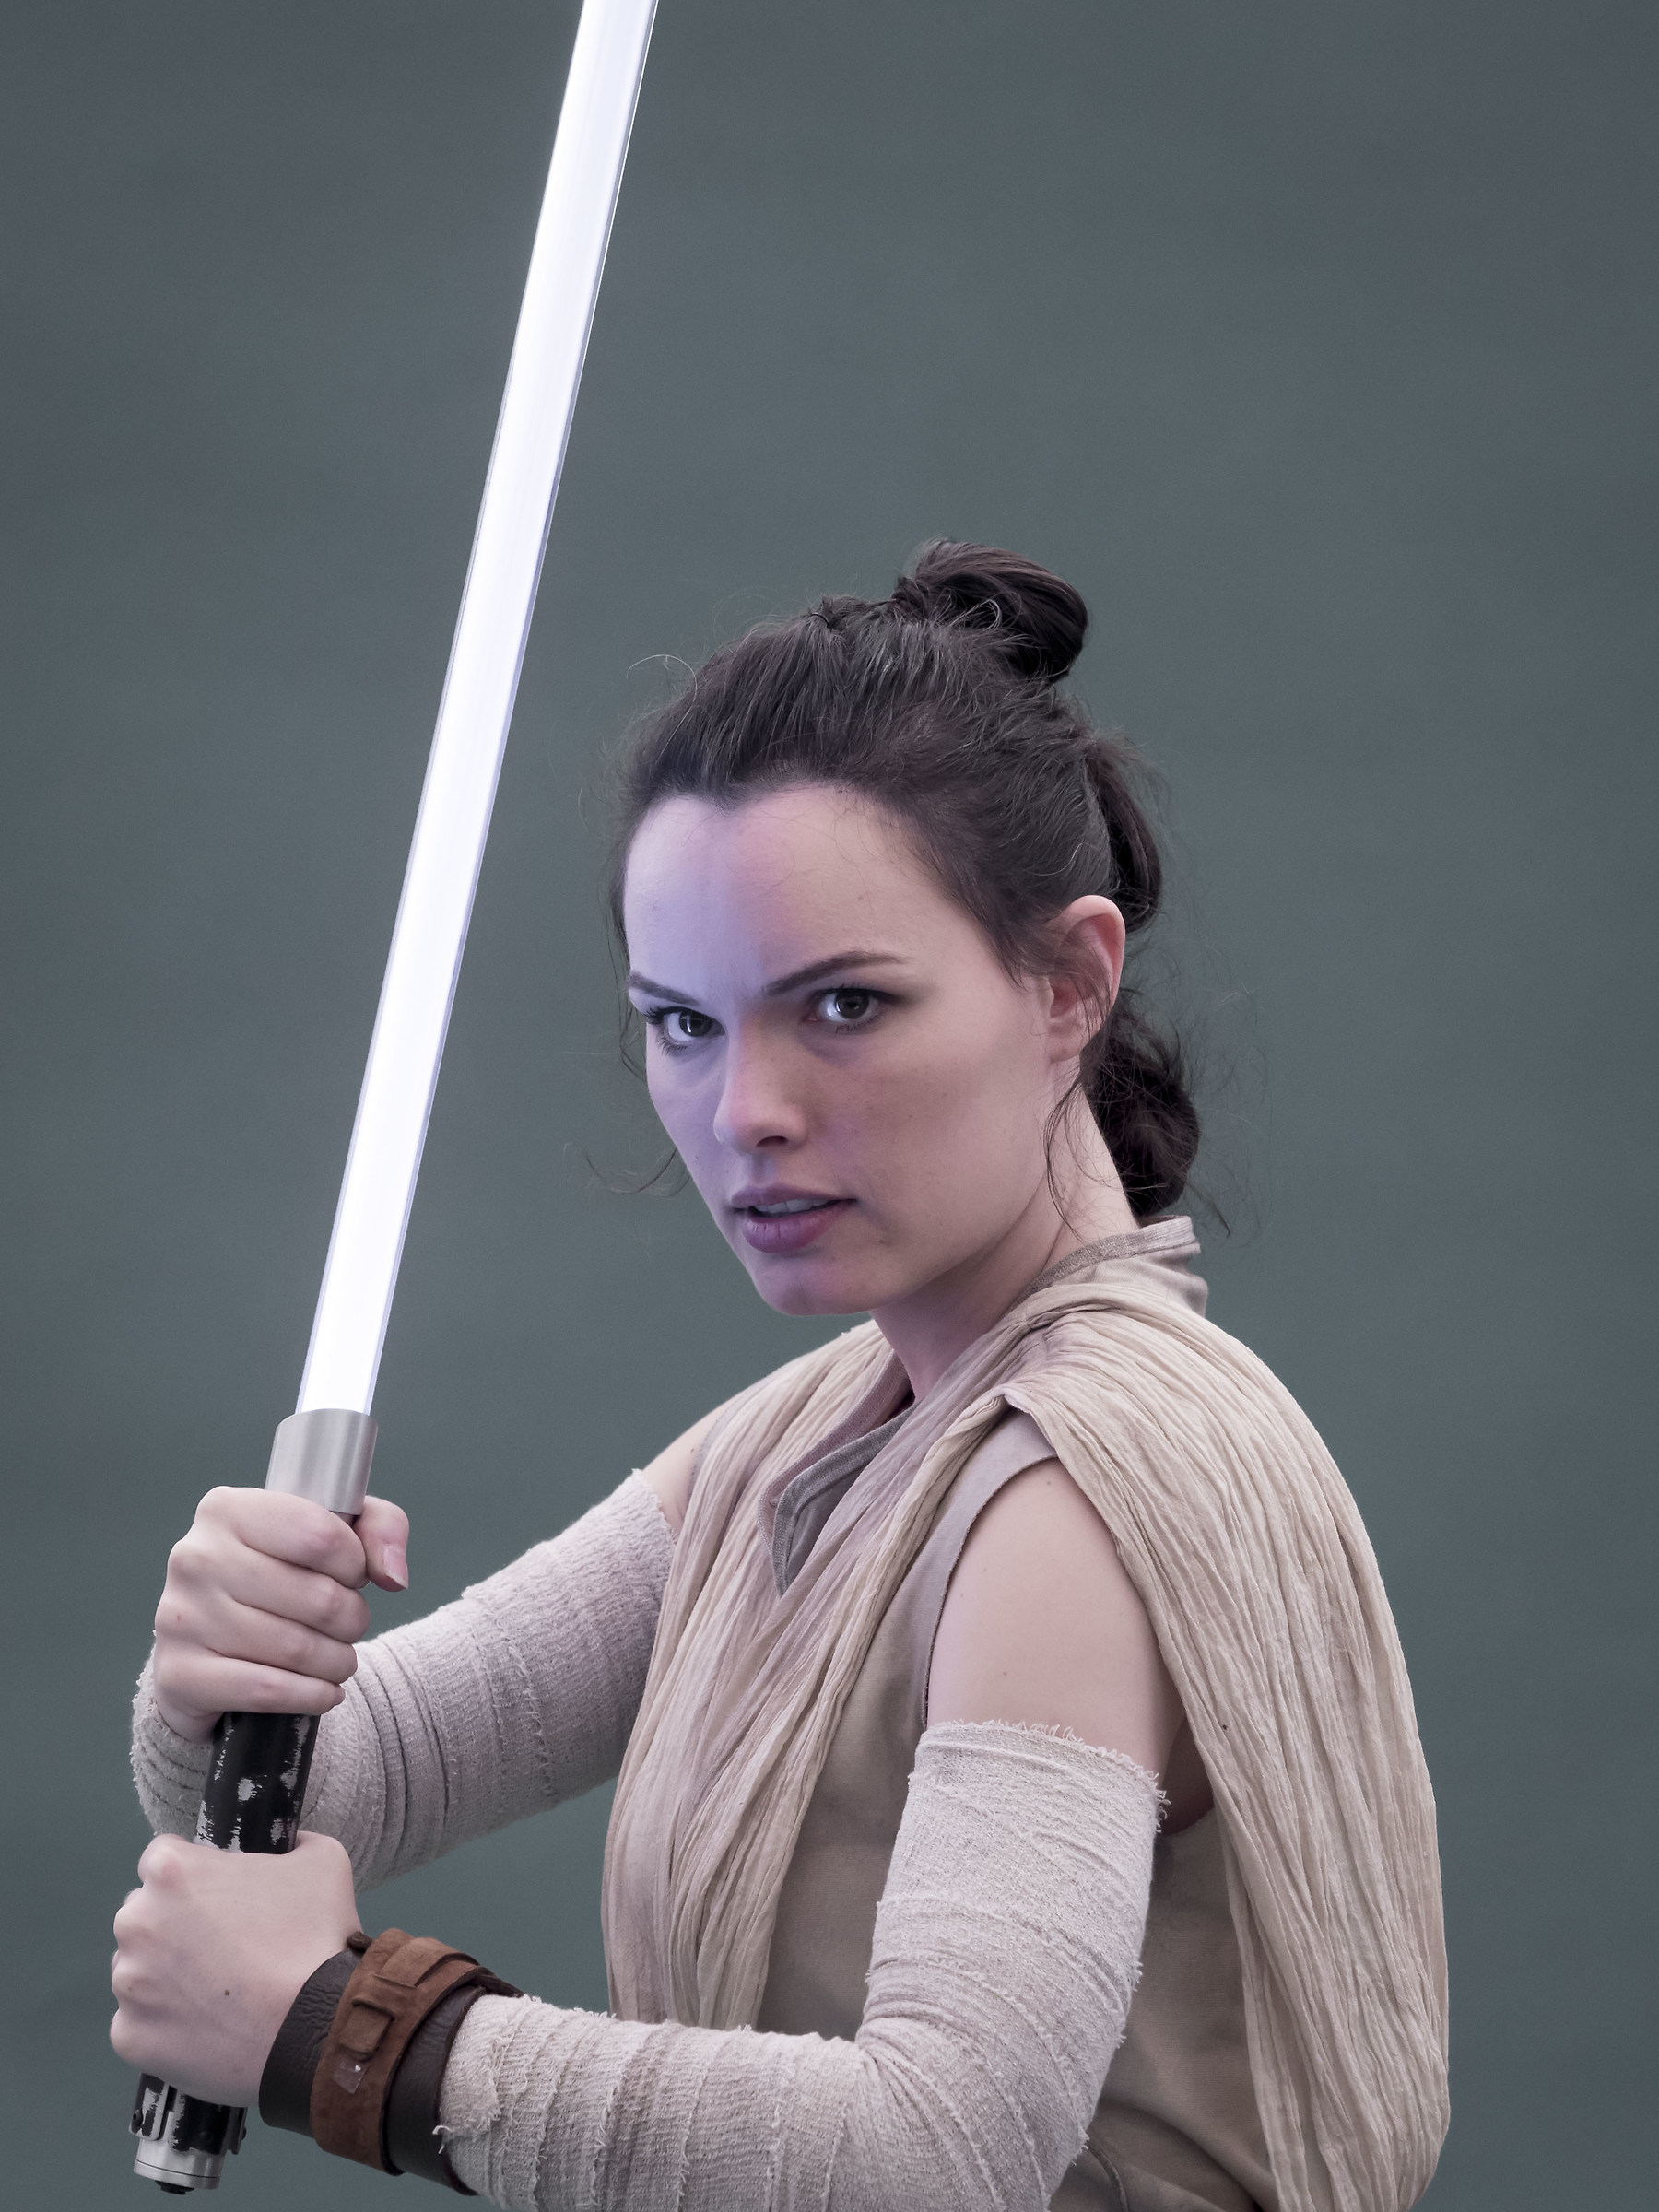 Rey... May the Force be with us...